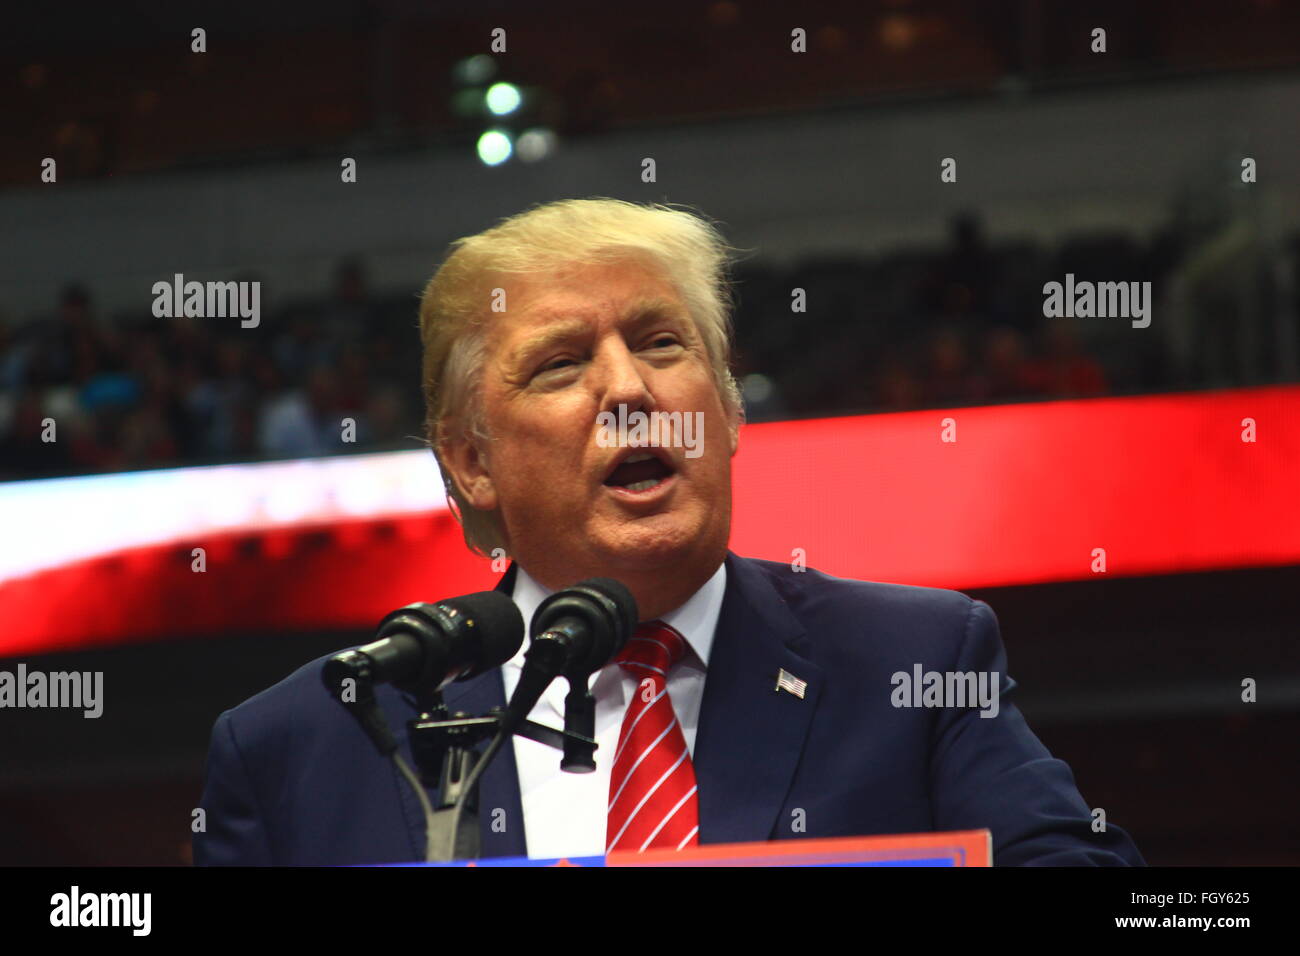 Donald John Trump, an American real estate developer, television personality, business author and GOP political candidate,  addresses supporters at a rally at the American Airlines Center in Dallas. Stock Photo